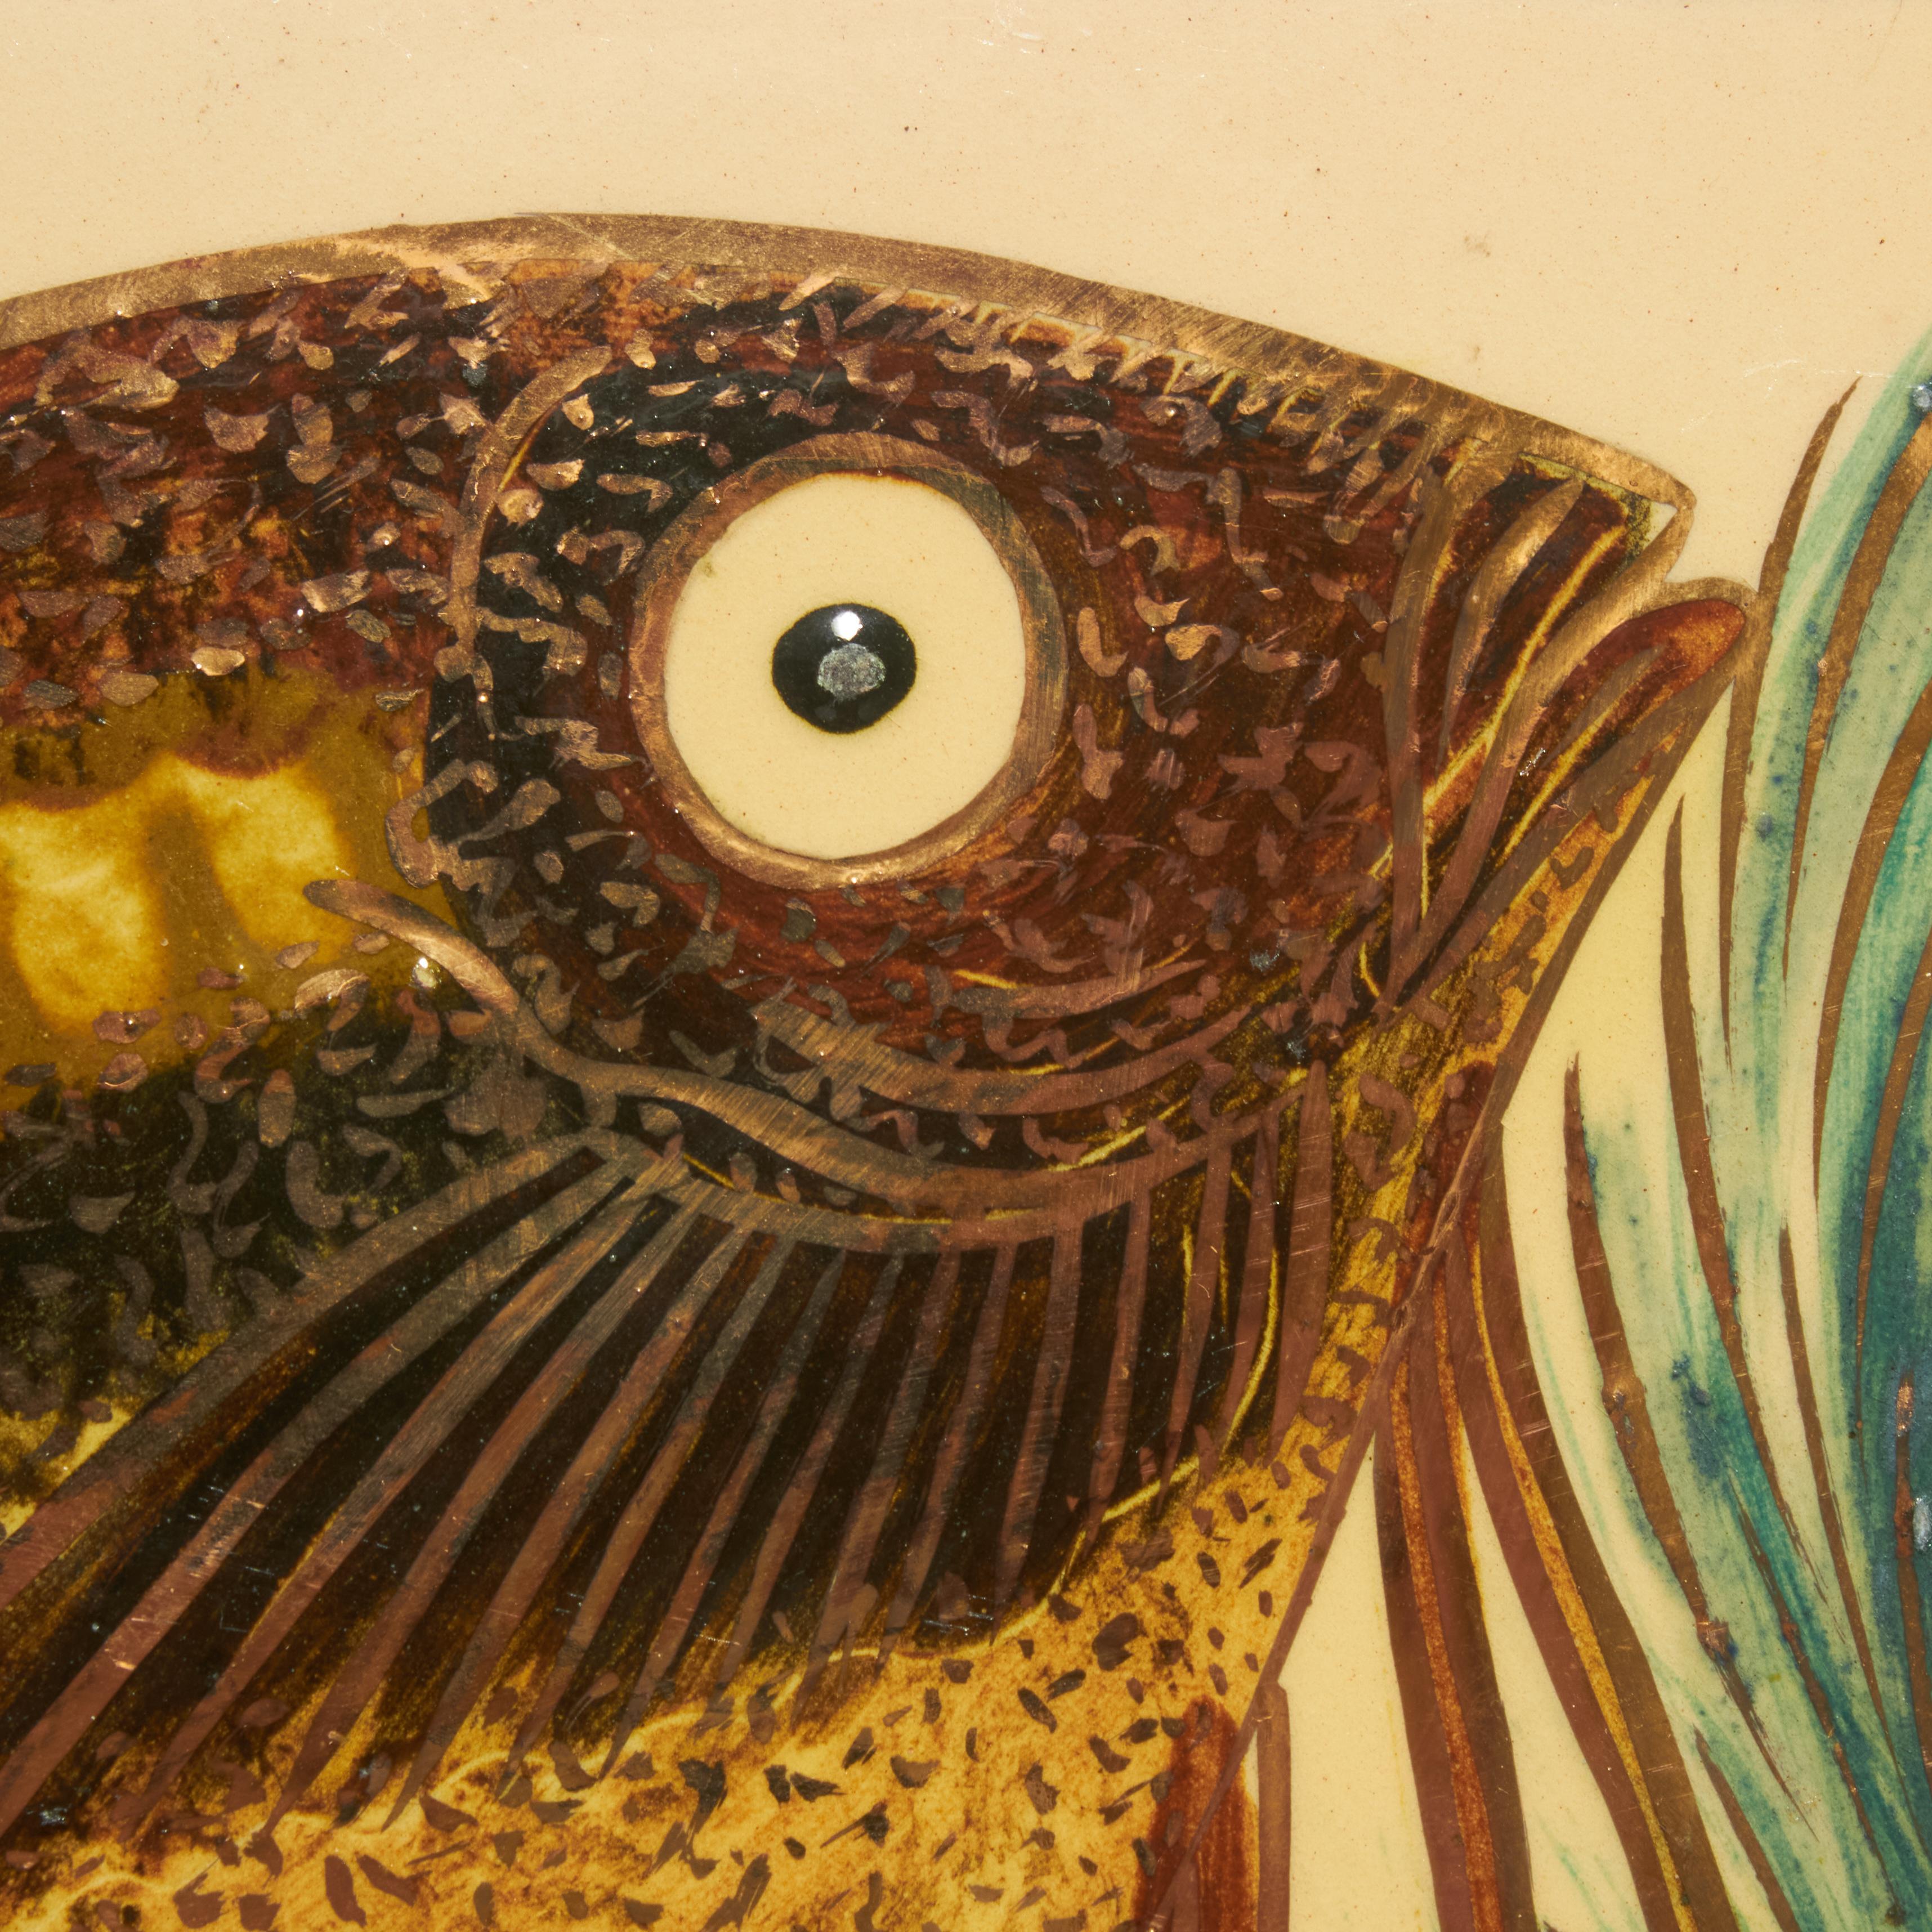 Glazed Vintage 1960 Hand-Painted Ceramic Gold Fish Artwork by Catalan Artist Diaz Costa For Sale